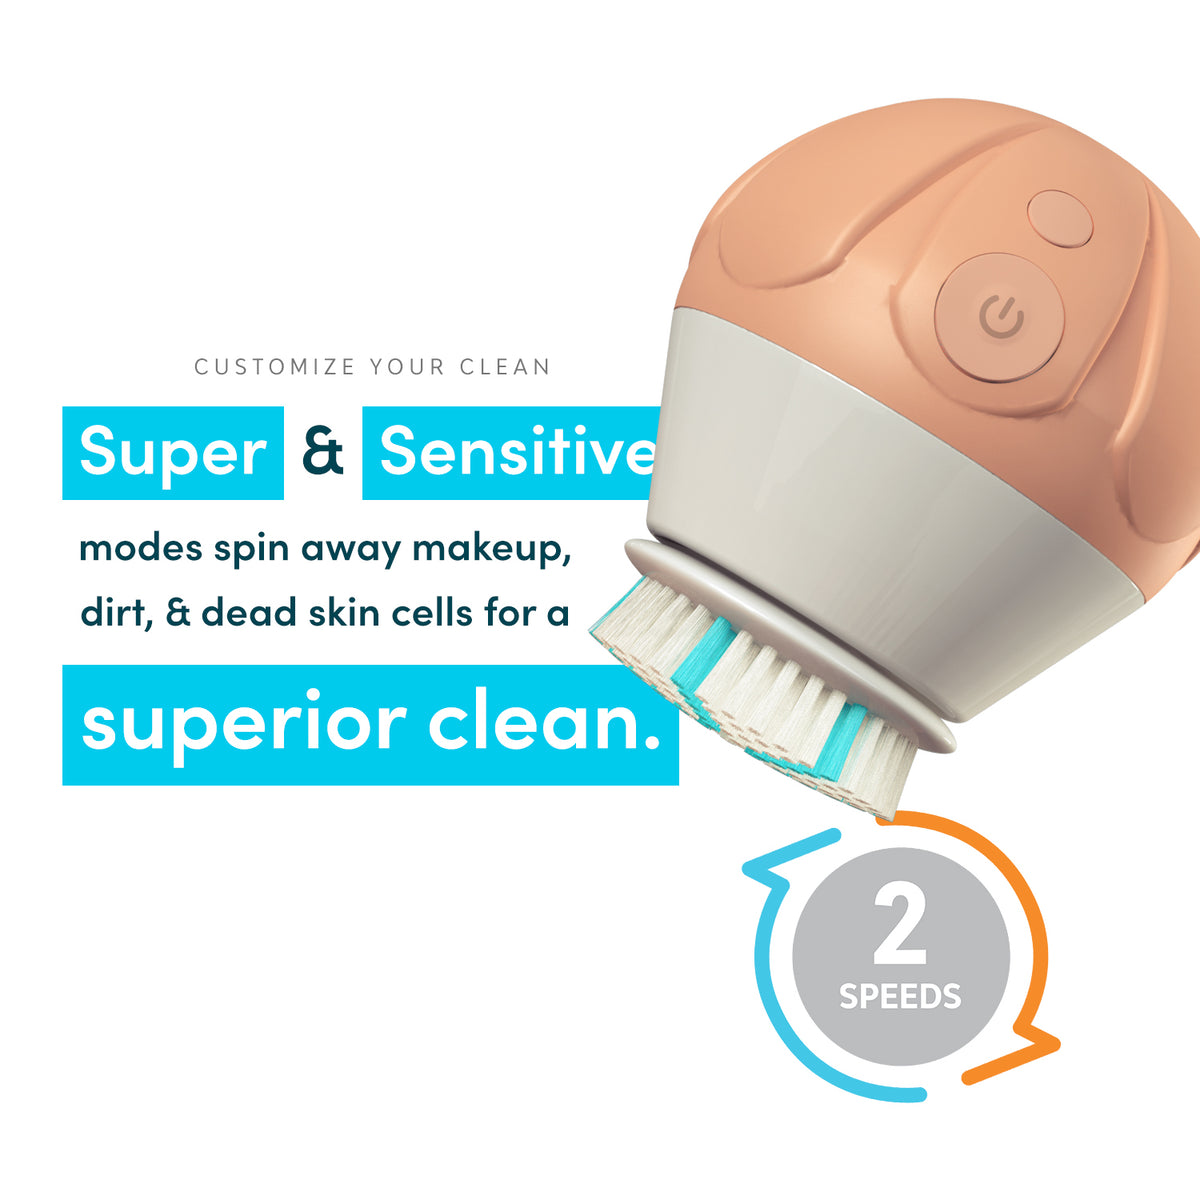 This Electric Spin Brush Cleans With Little Effort, and It's on Sale